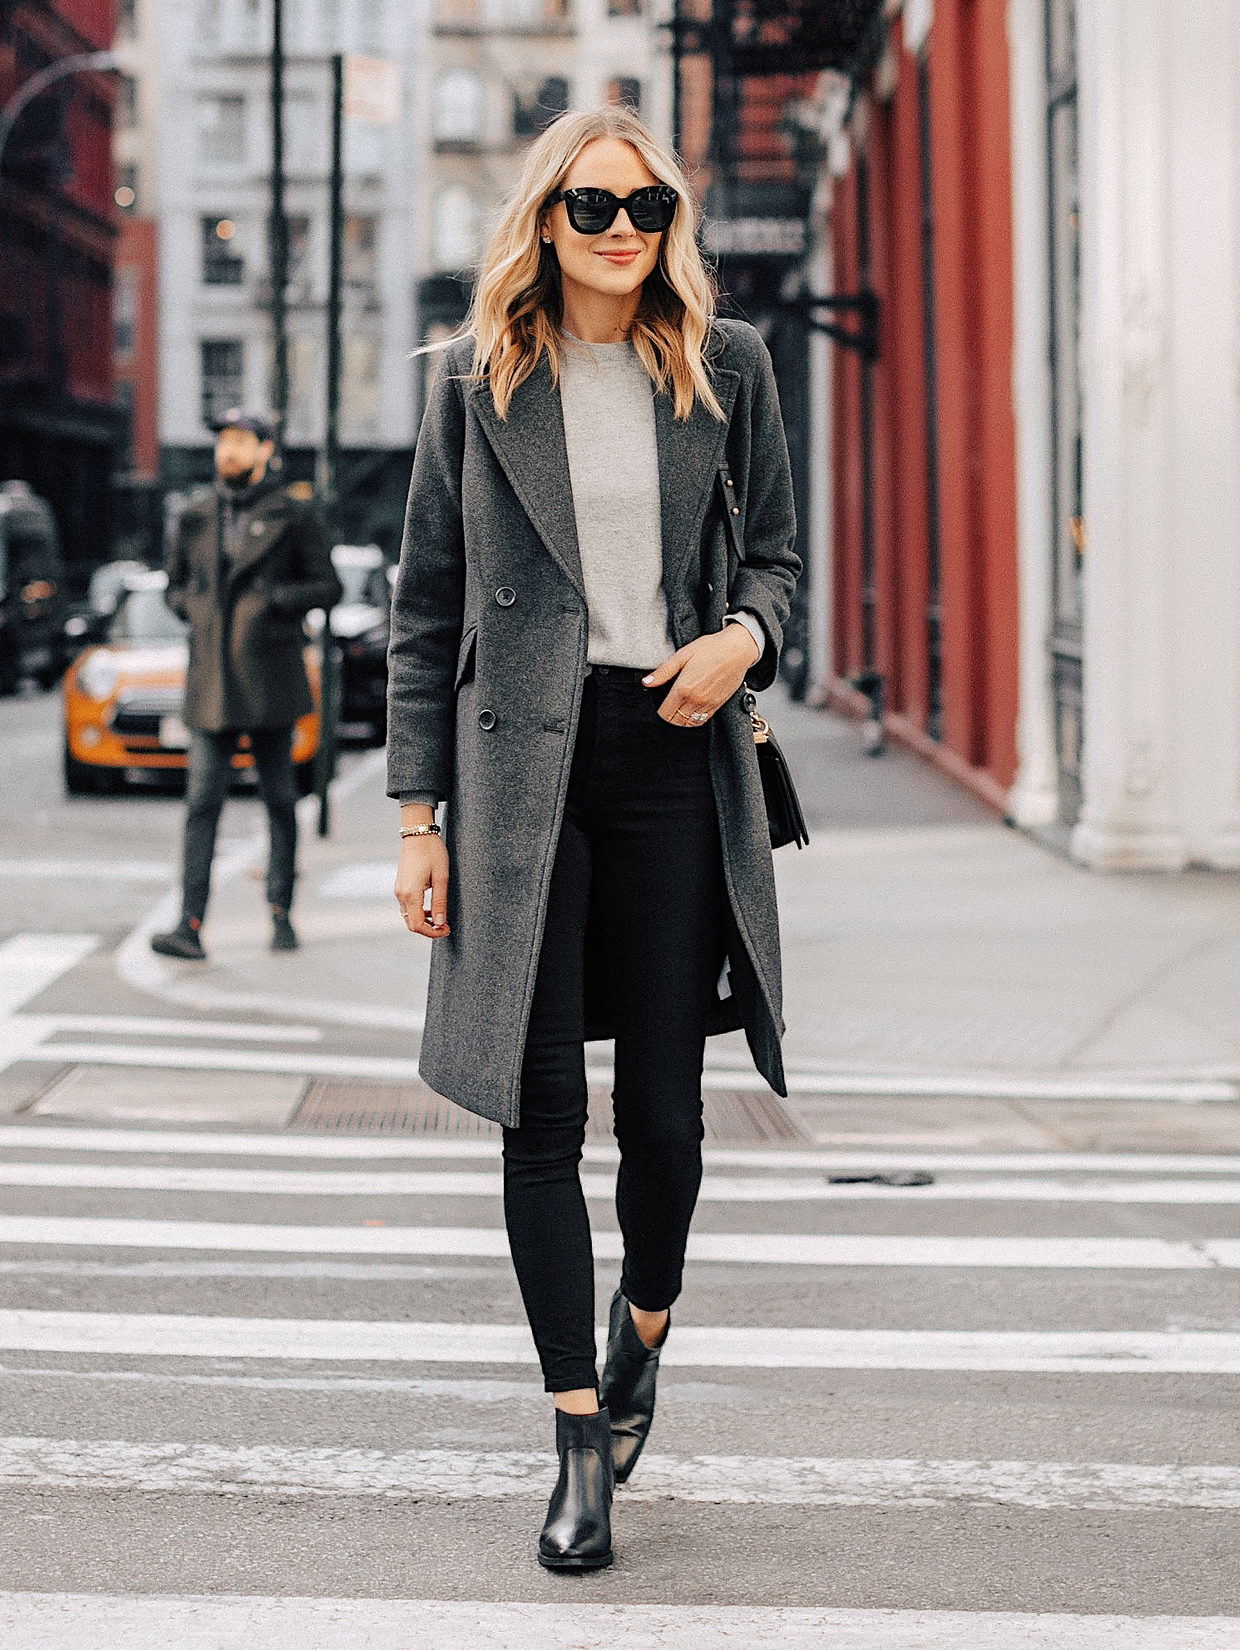 The Classic Winter Outfit From Everlane I Wore in NYC - Fashion Jackson